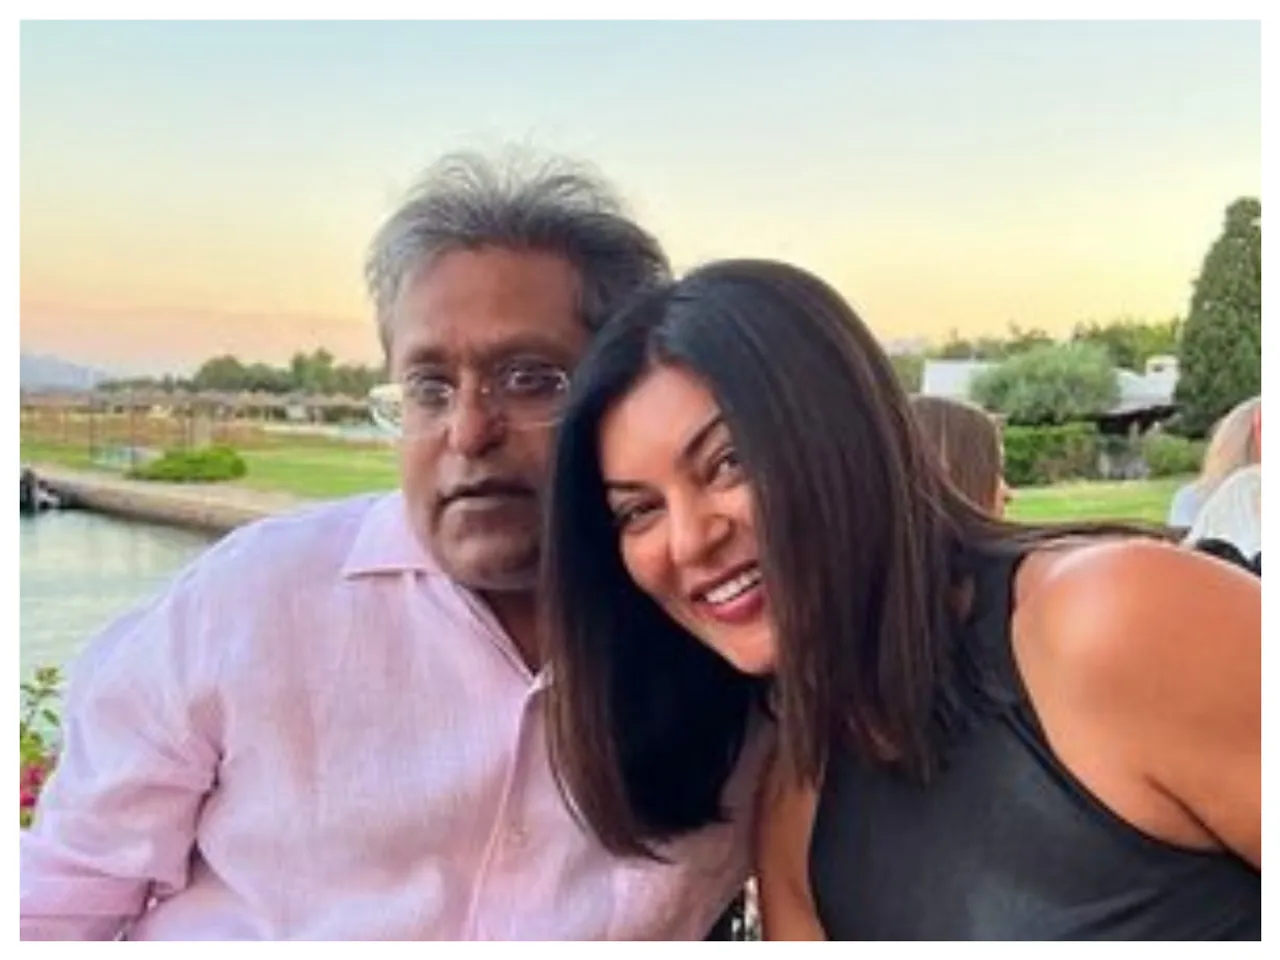 Indian T20 League Founder Lalit Modi announces his relationship with Sushmita Sen, pictures go viral on social media